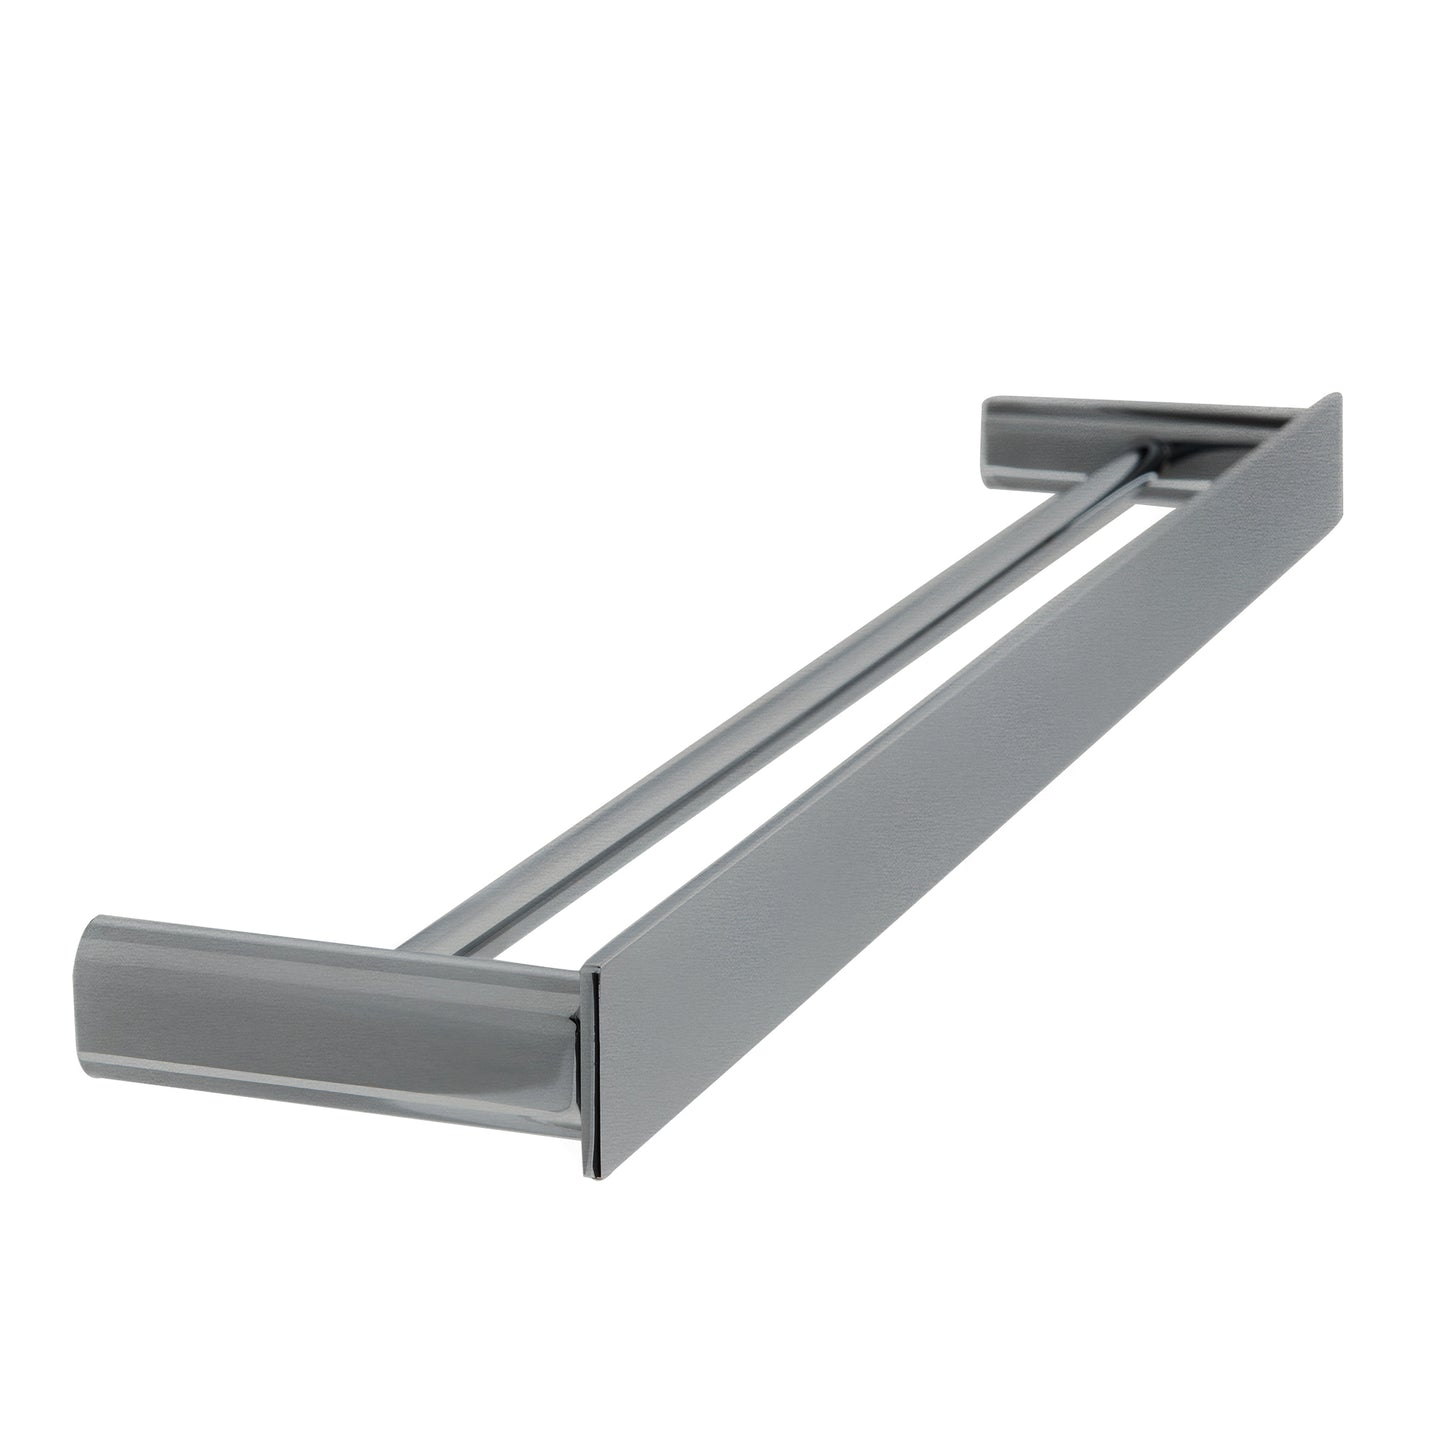 Linkware - Gabe Double Towel Rail in 5 finishes